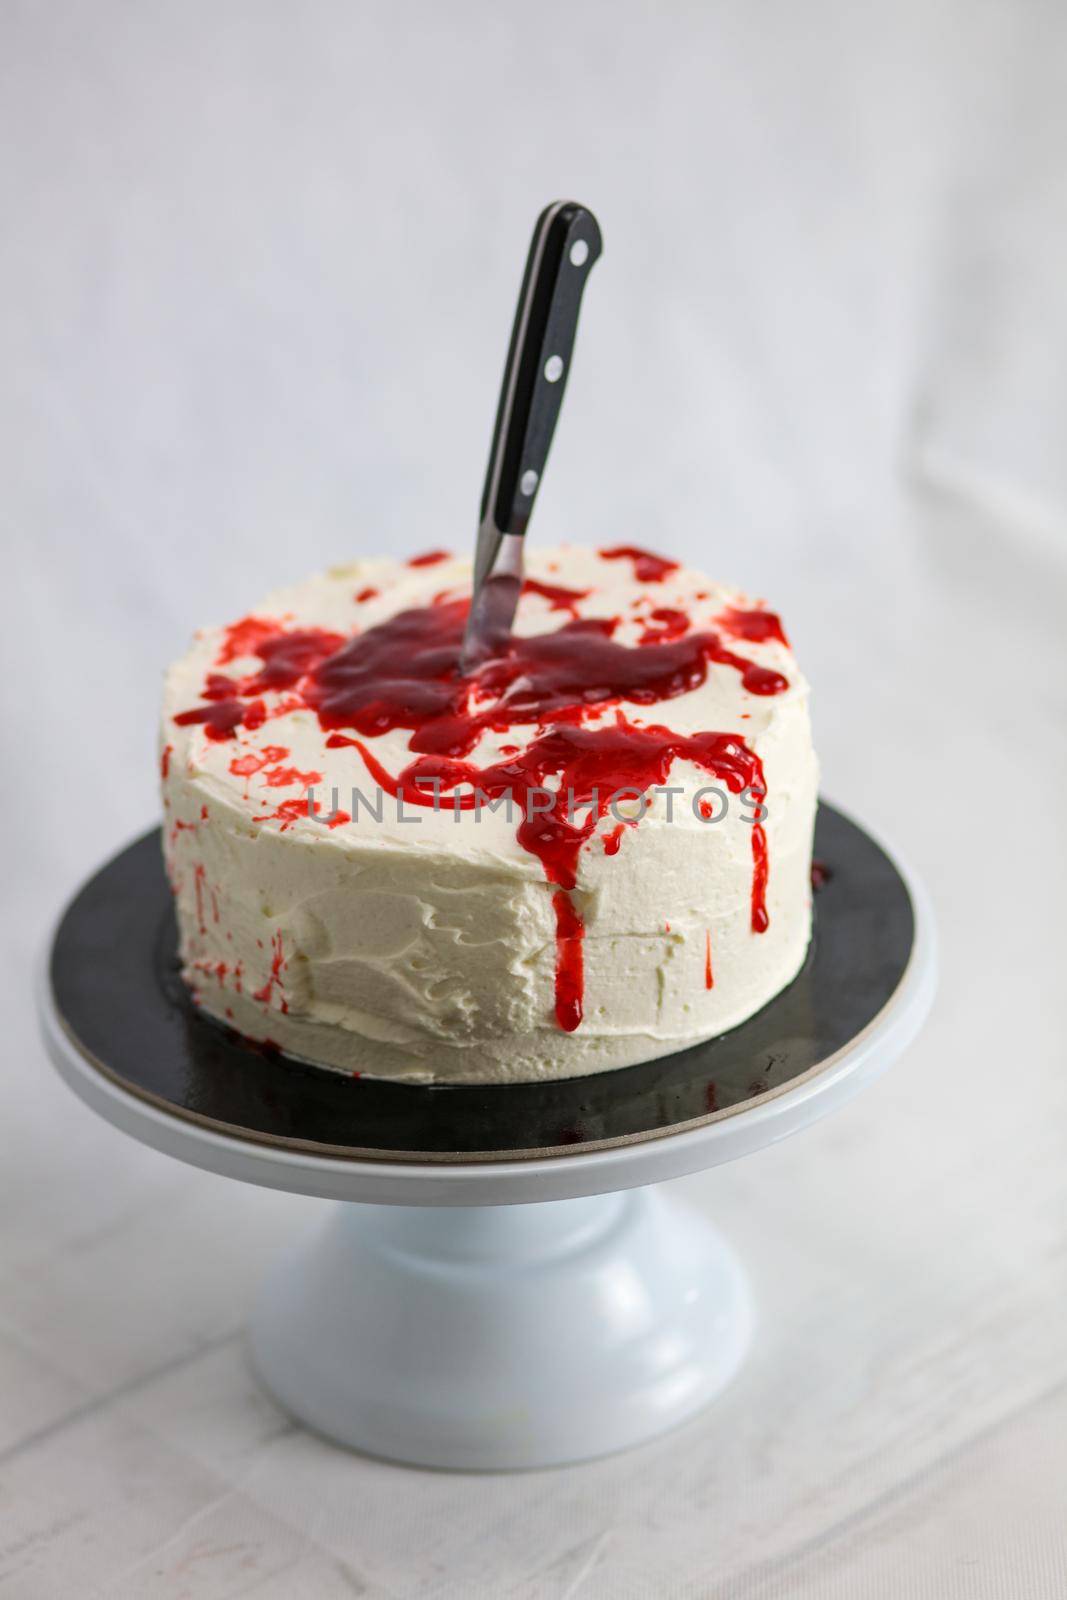 Bleeding monster cake with knife on cake stand